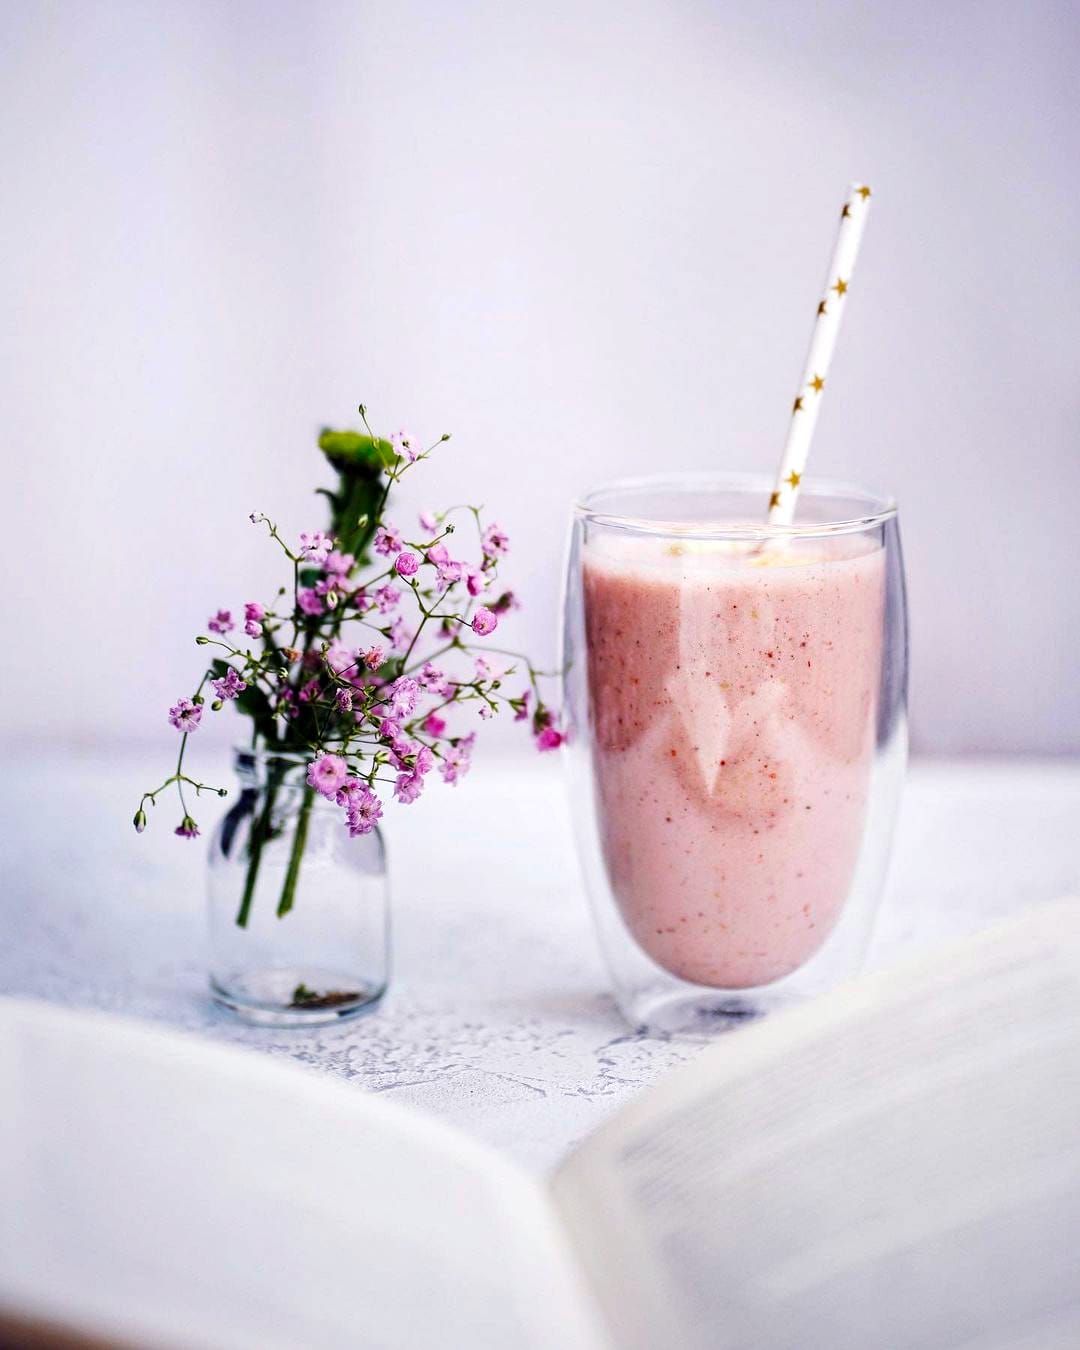 A delicious smoothie combined with Collagen Vital Power